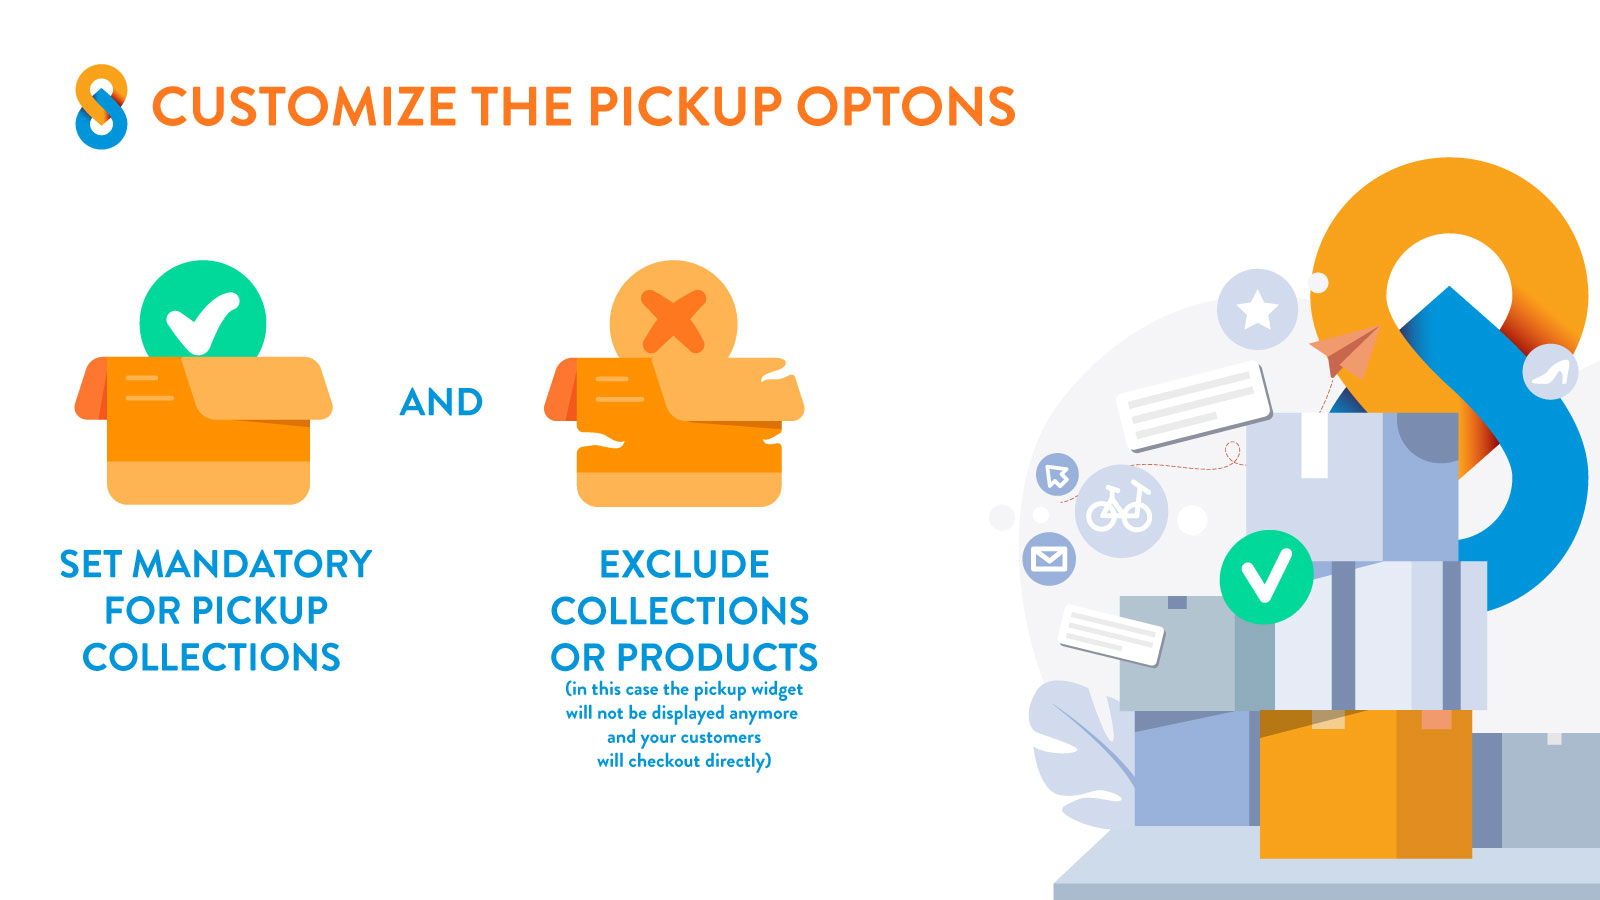 add mandatory for pickup collections, exclude products